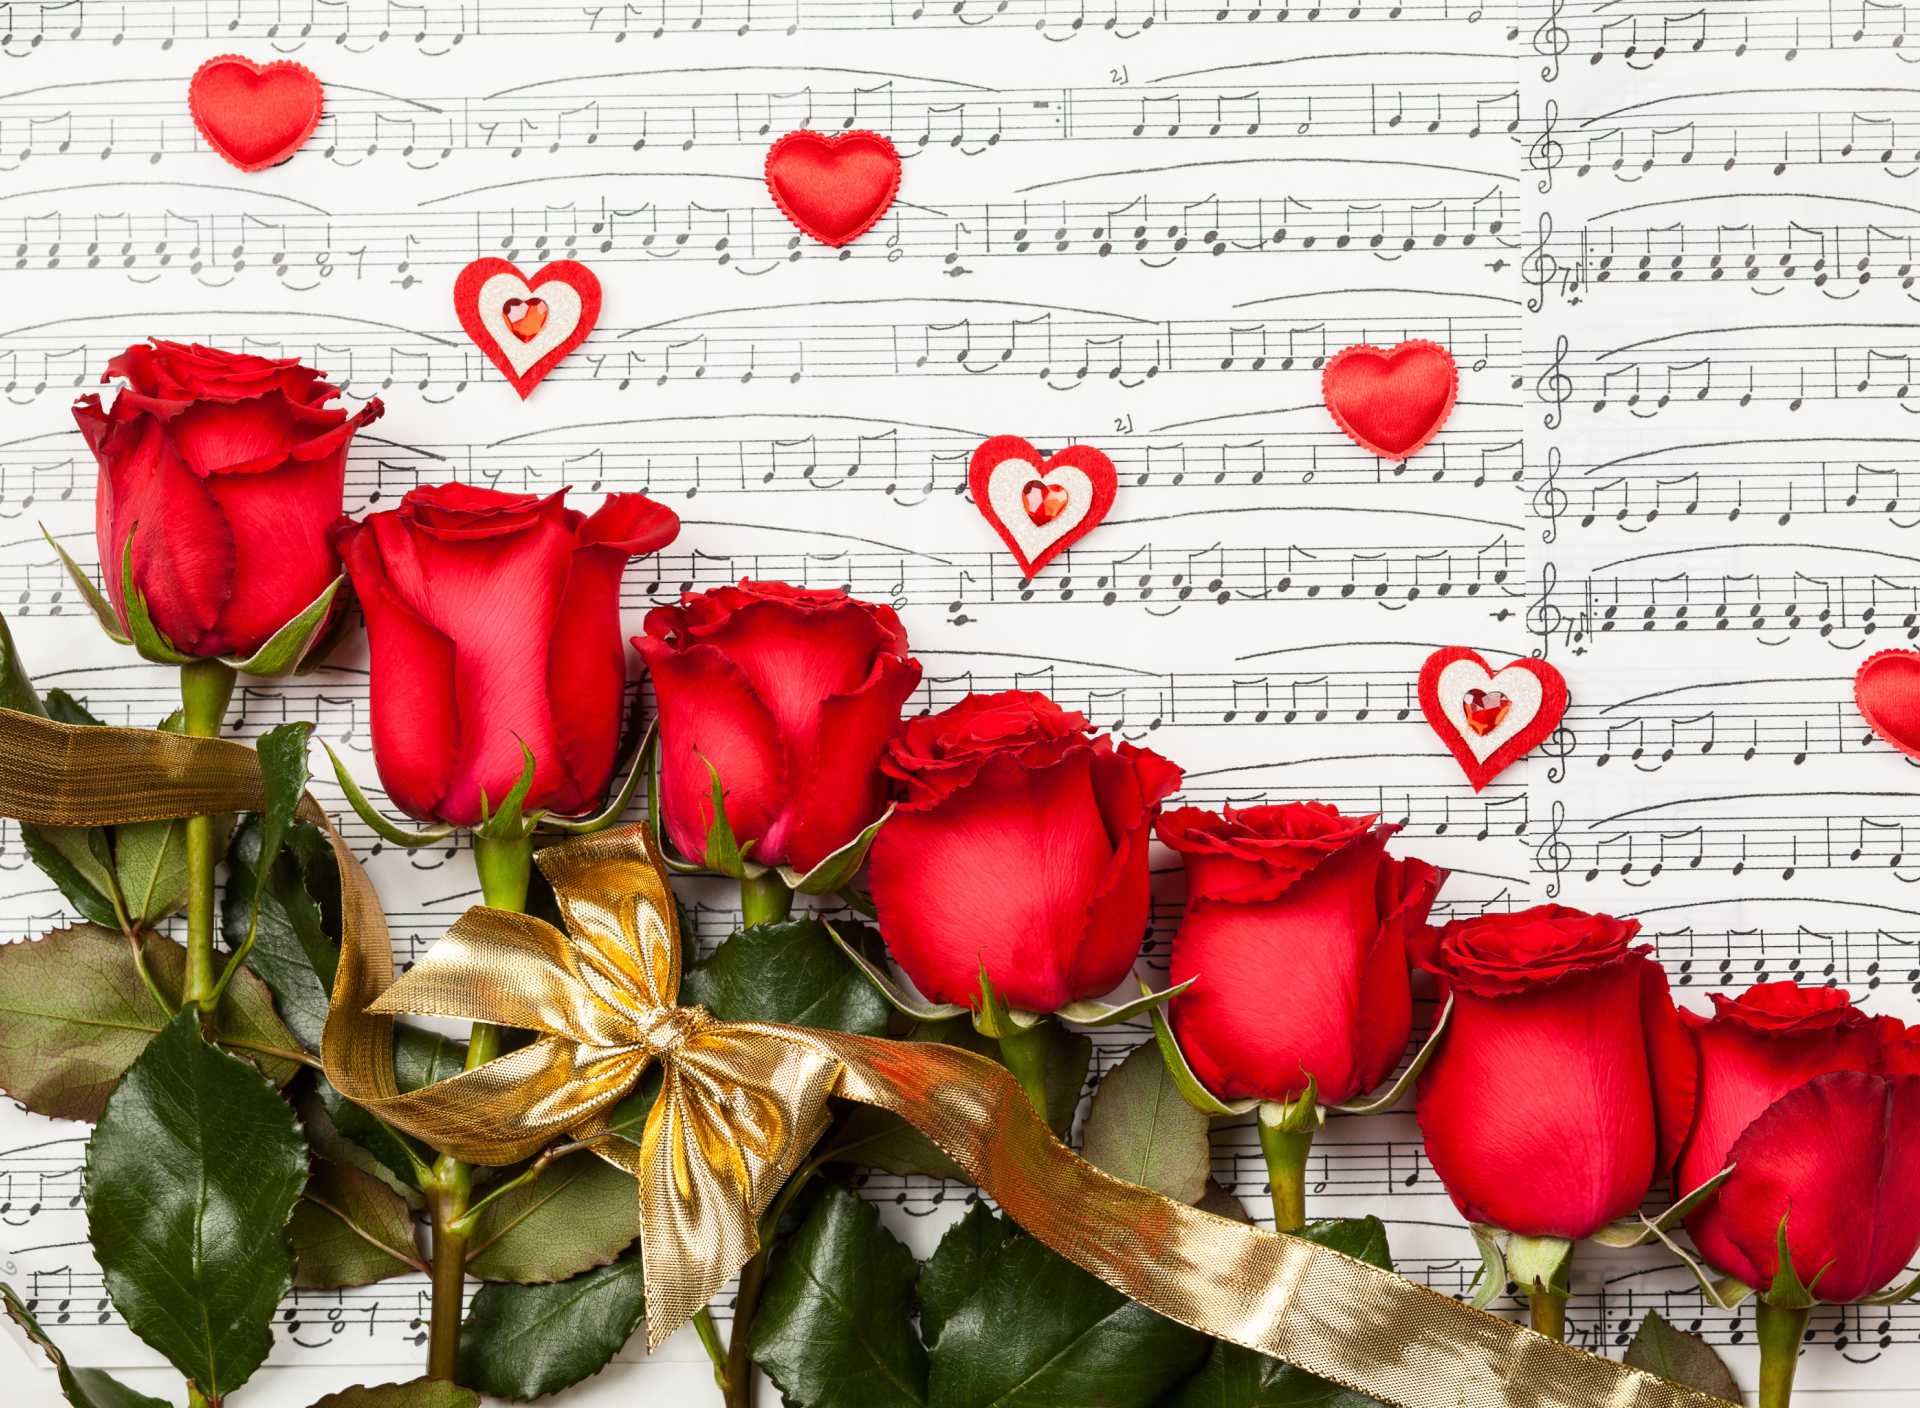 Roses, Love And Music wallpaper 1920x1408